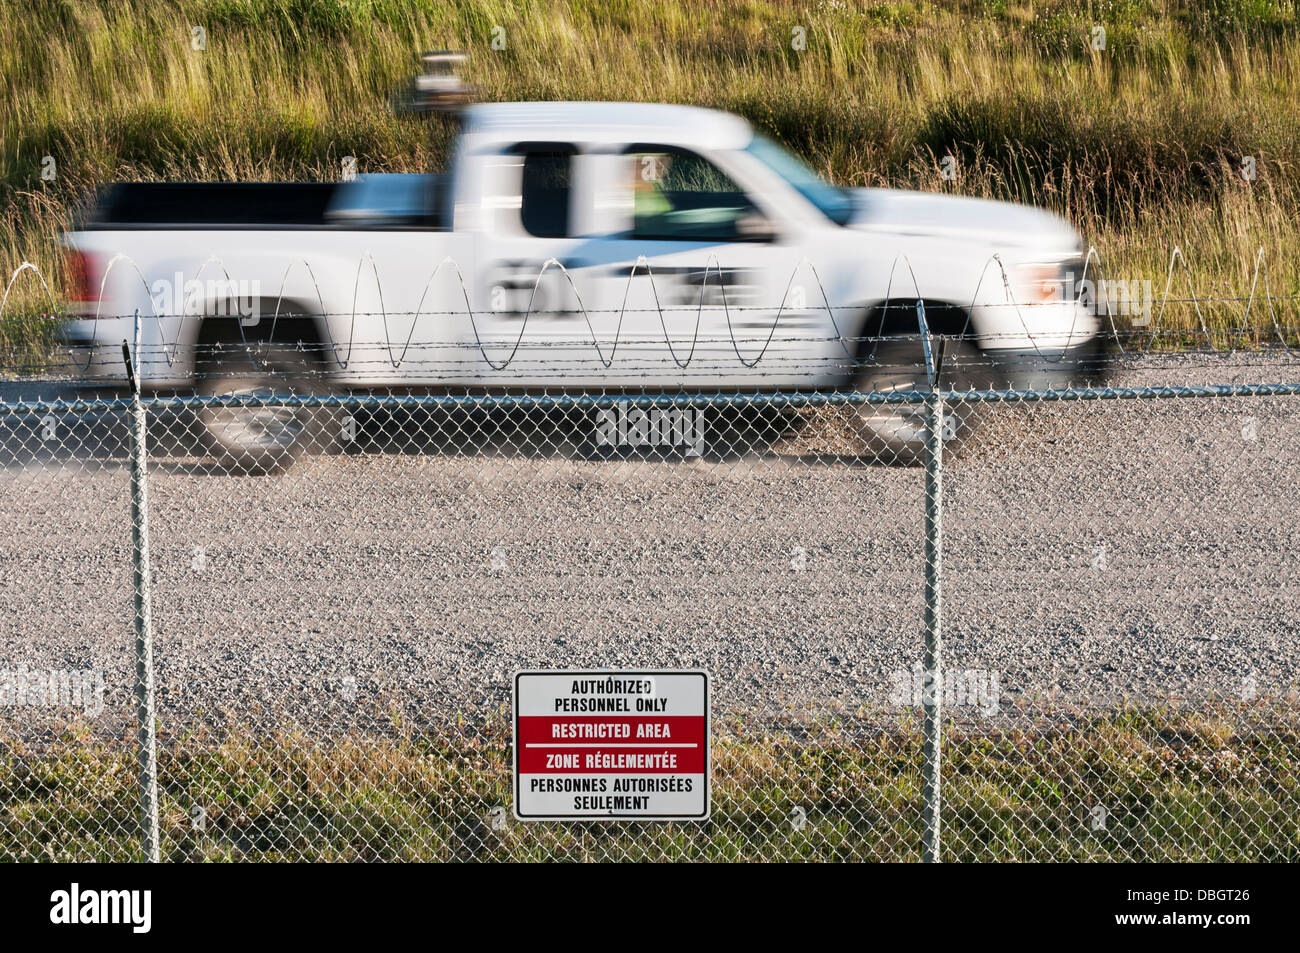 Airport perimeter security: tall fence,razor wire,warning sign and a visual check by airport personnel driving a truck Stock Photo